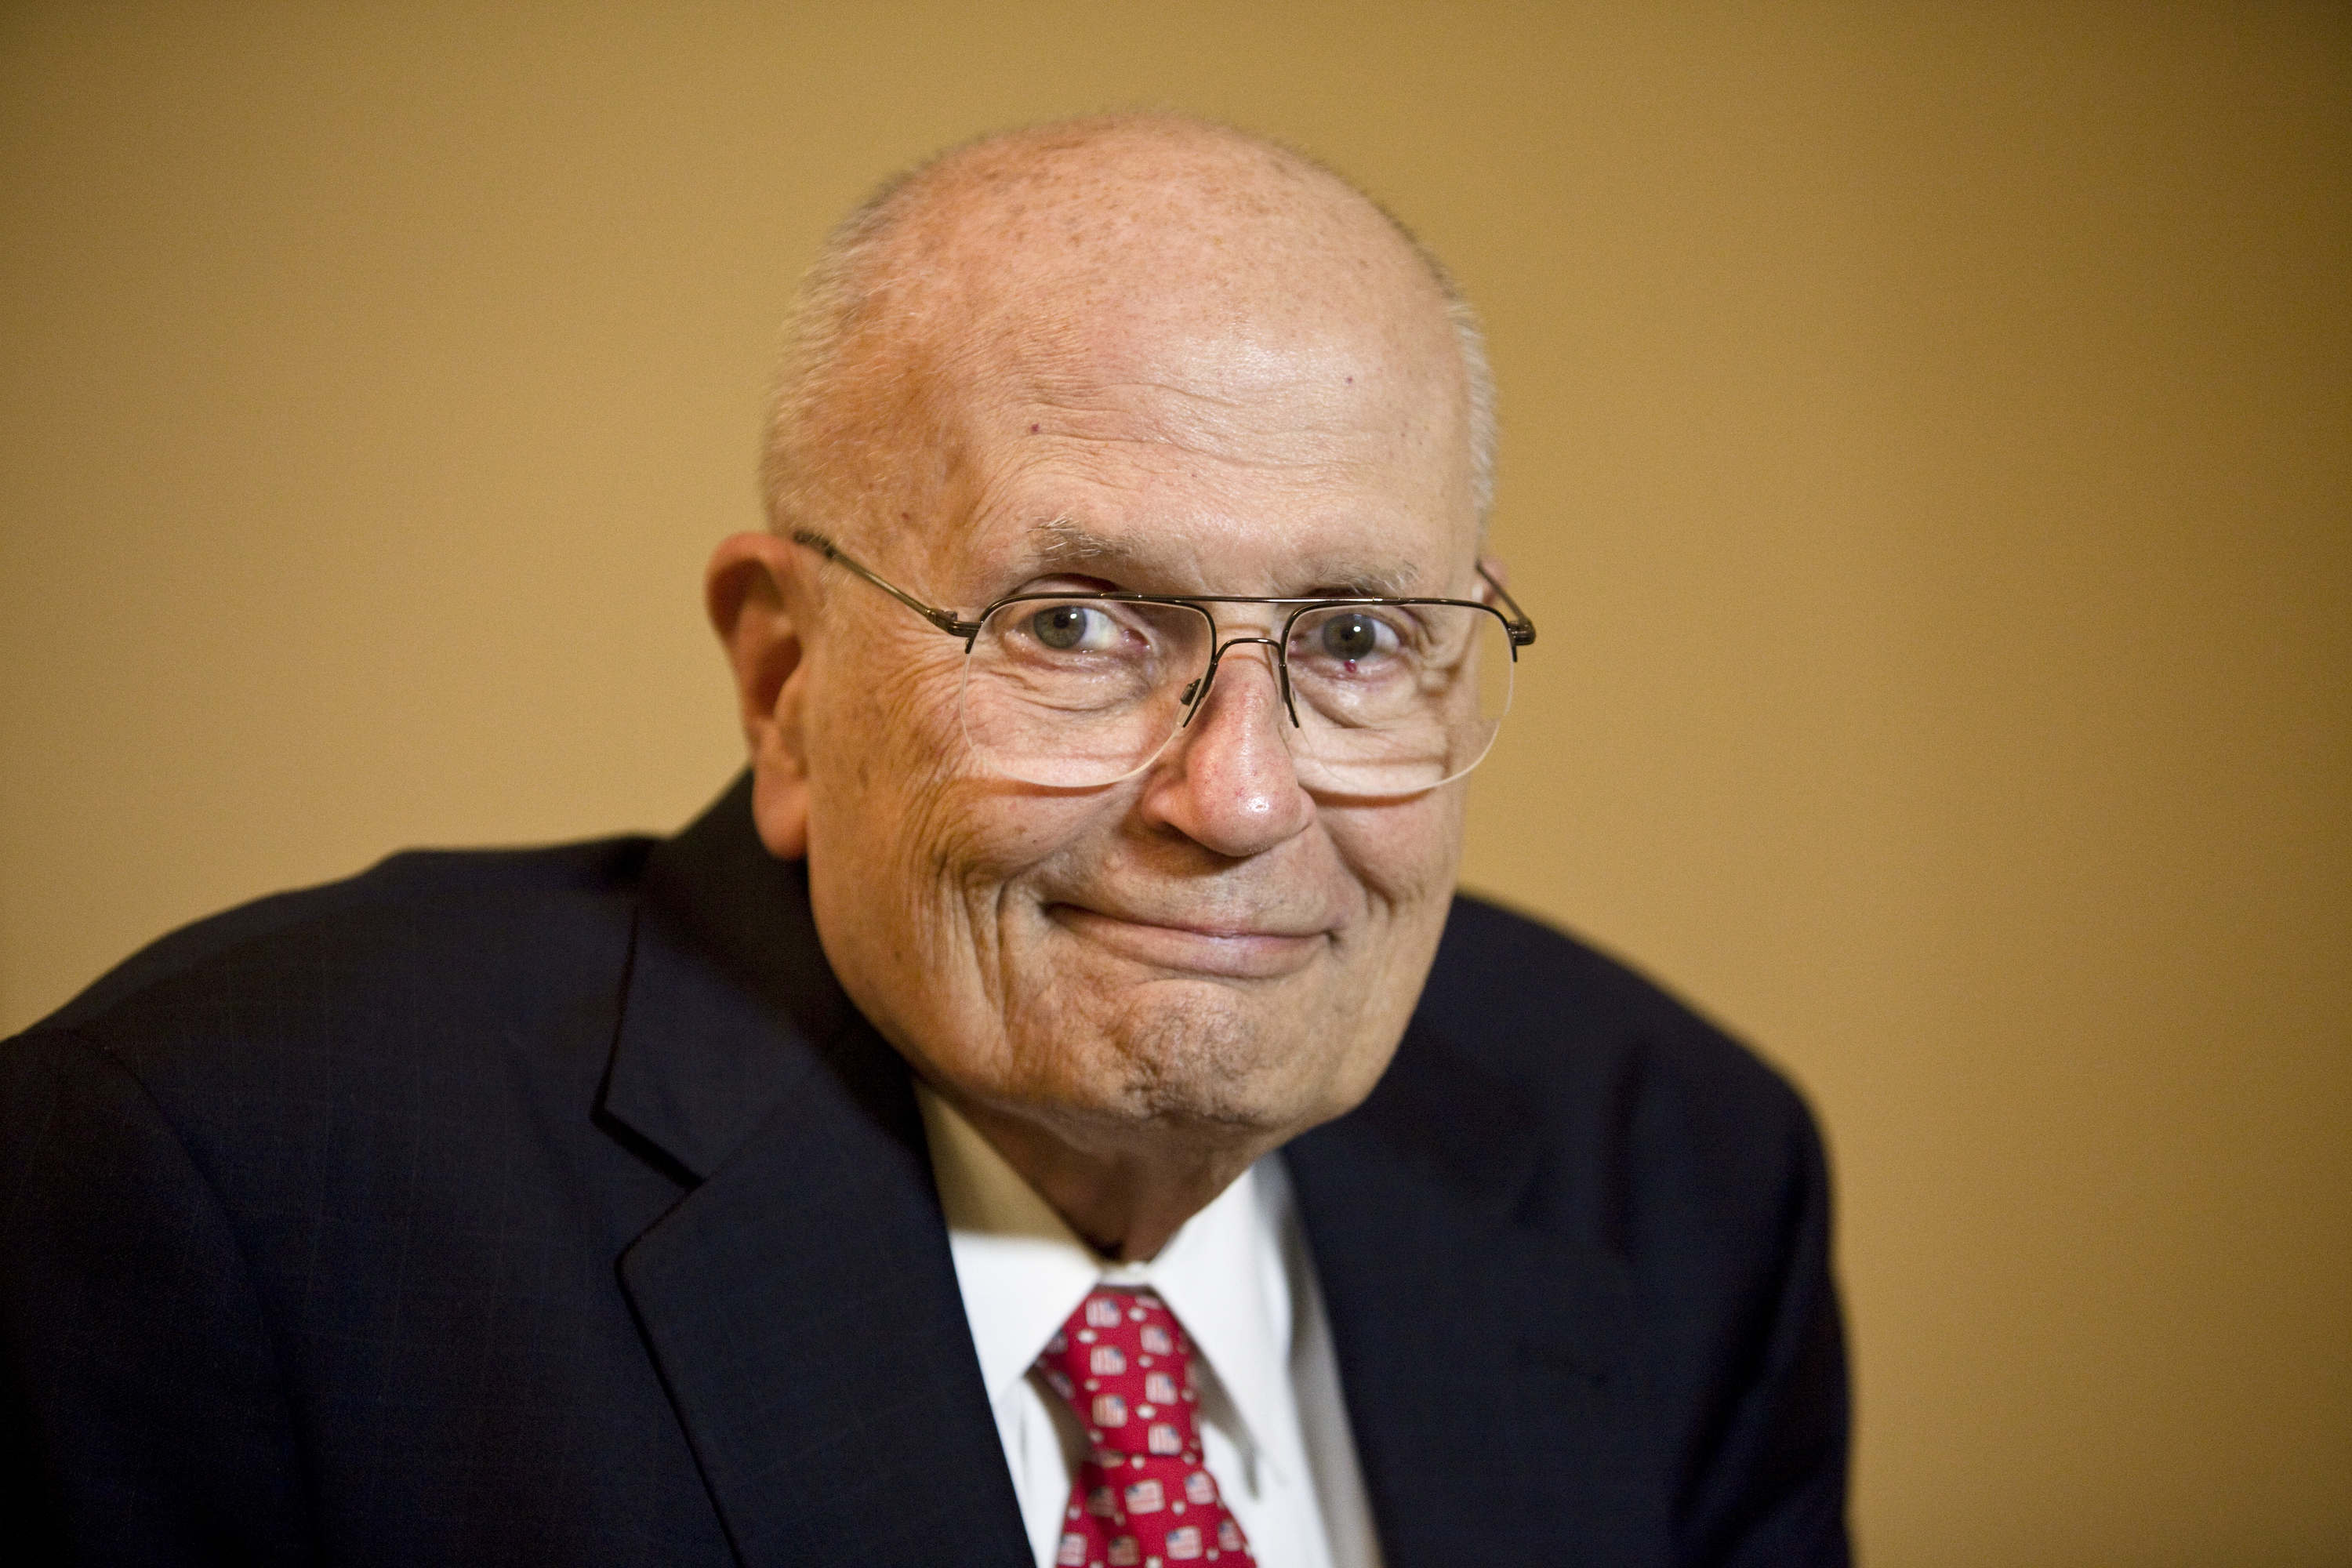 The late representative John Dingell | Photo: Getty Images